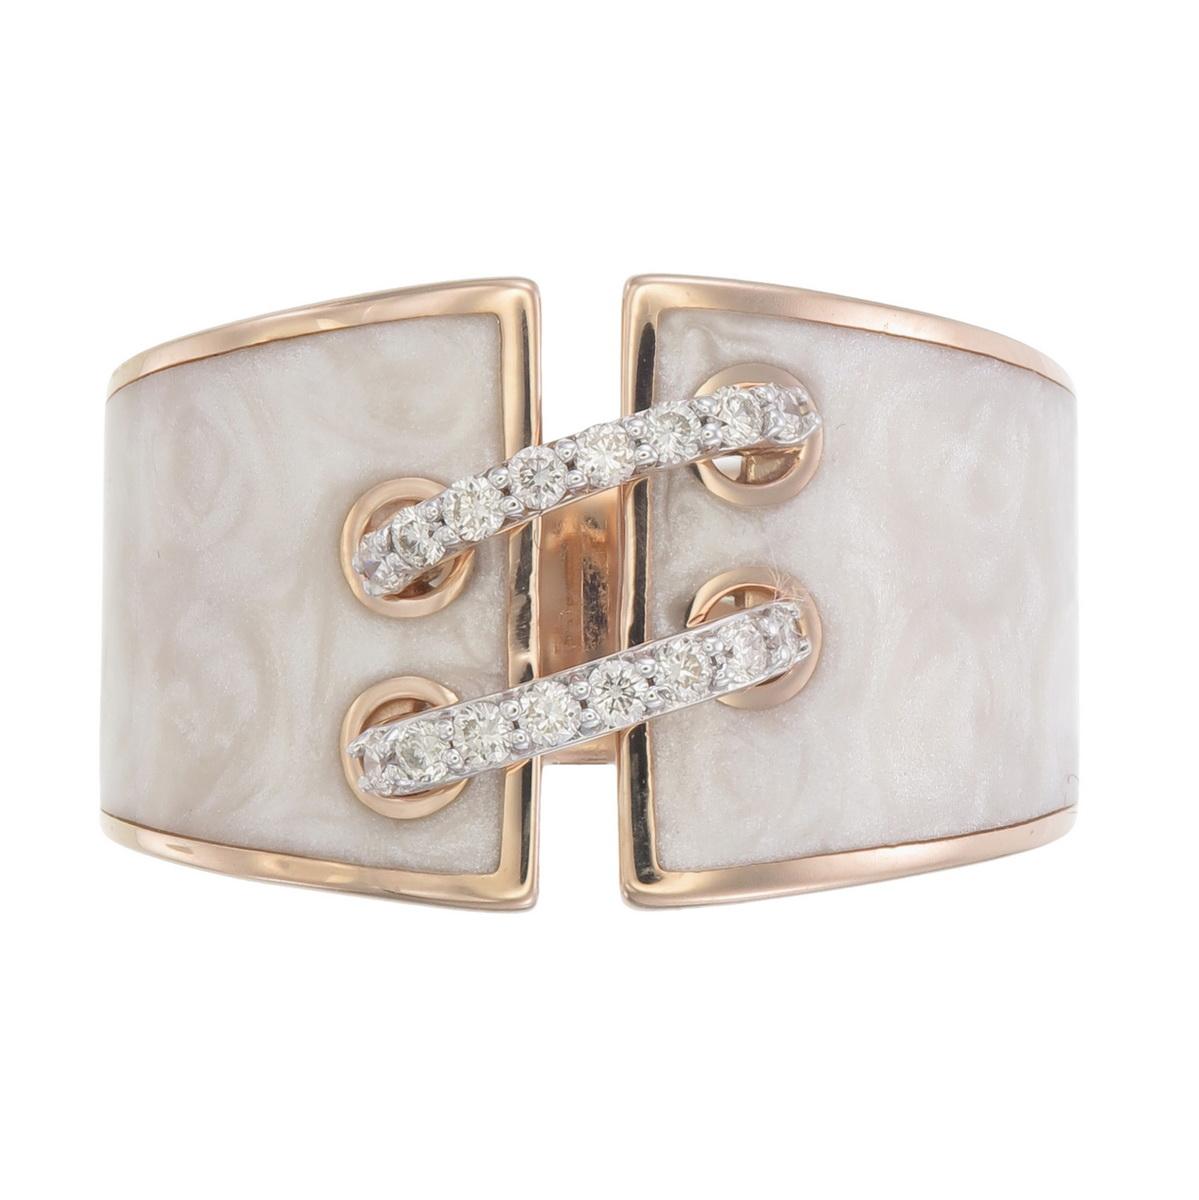 Ring made using Mother of pearl Ceramic n 18kt Pink gold & natural diamonds
4.76 grams of gold along with 0.16 carat natural diamonds are used in this ring
